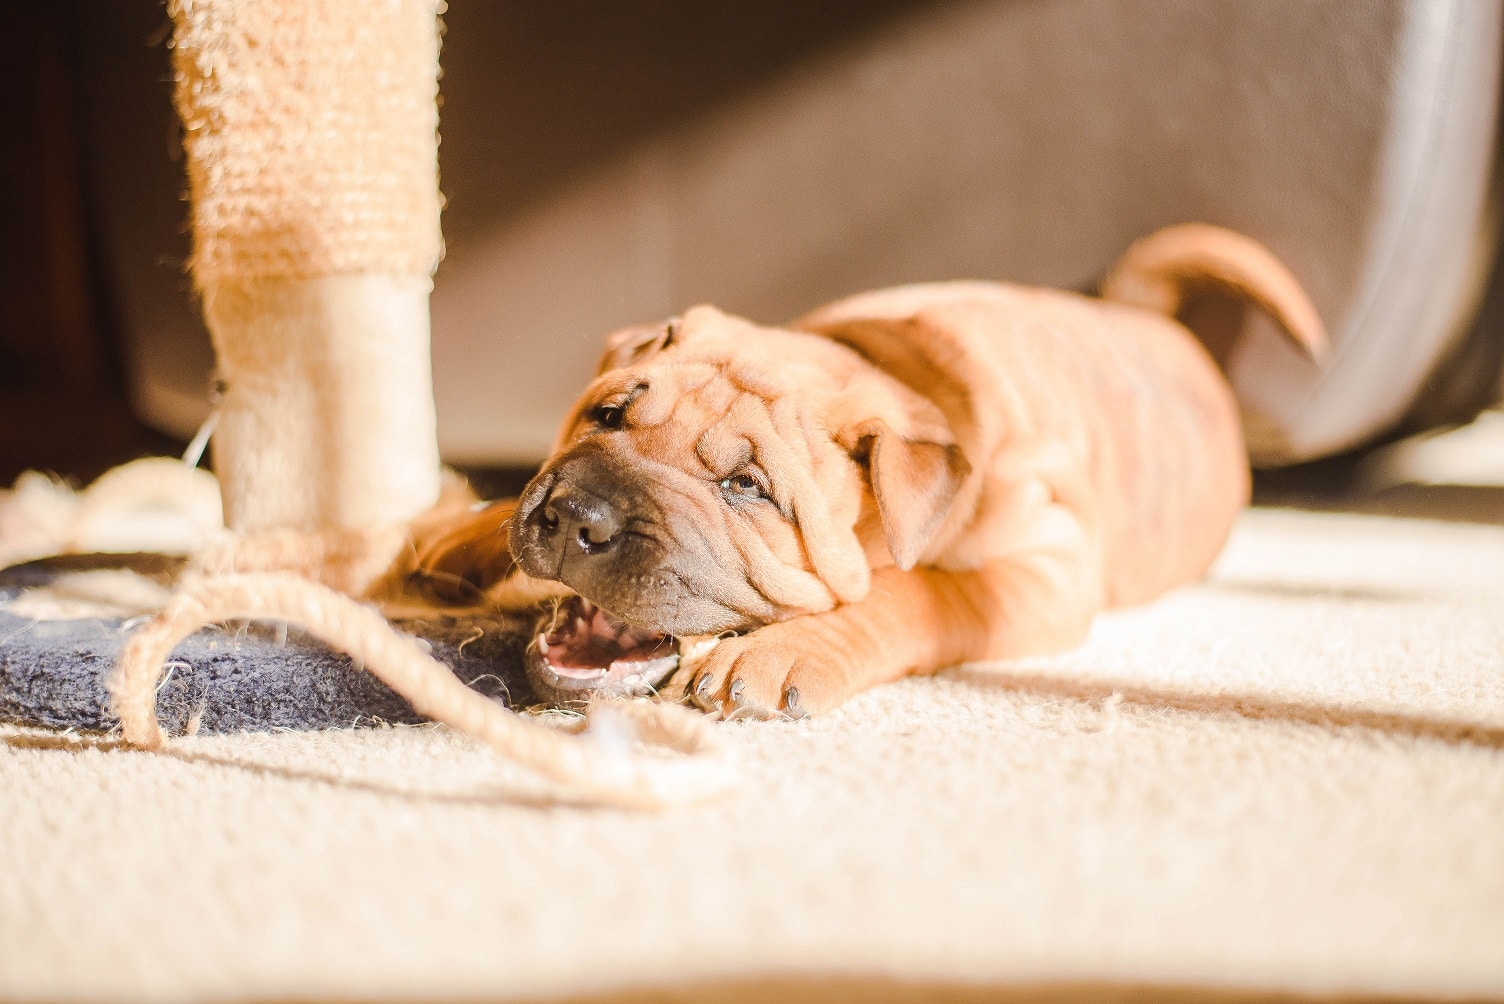 7 Behaviors to Look out for in a New Puppy